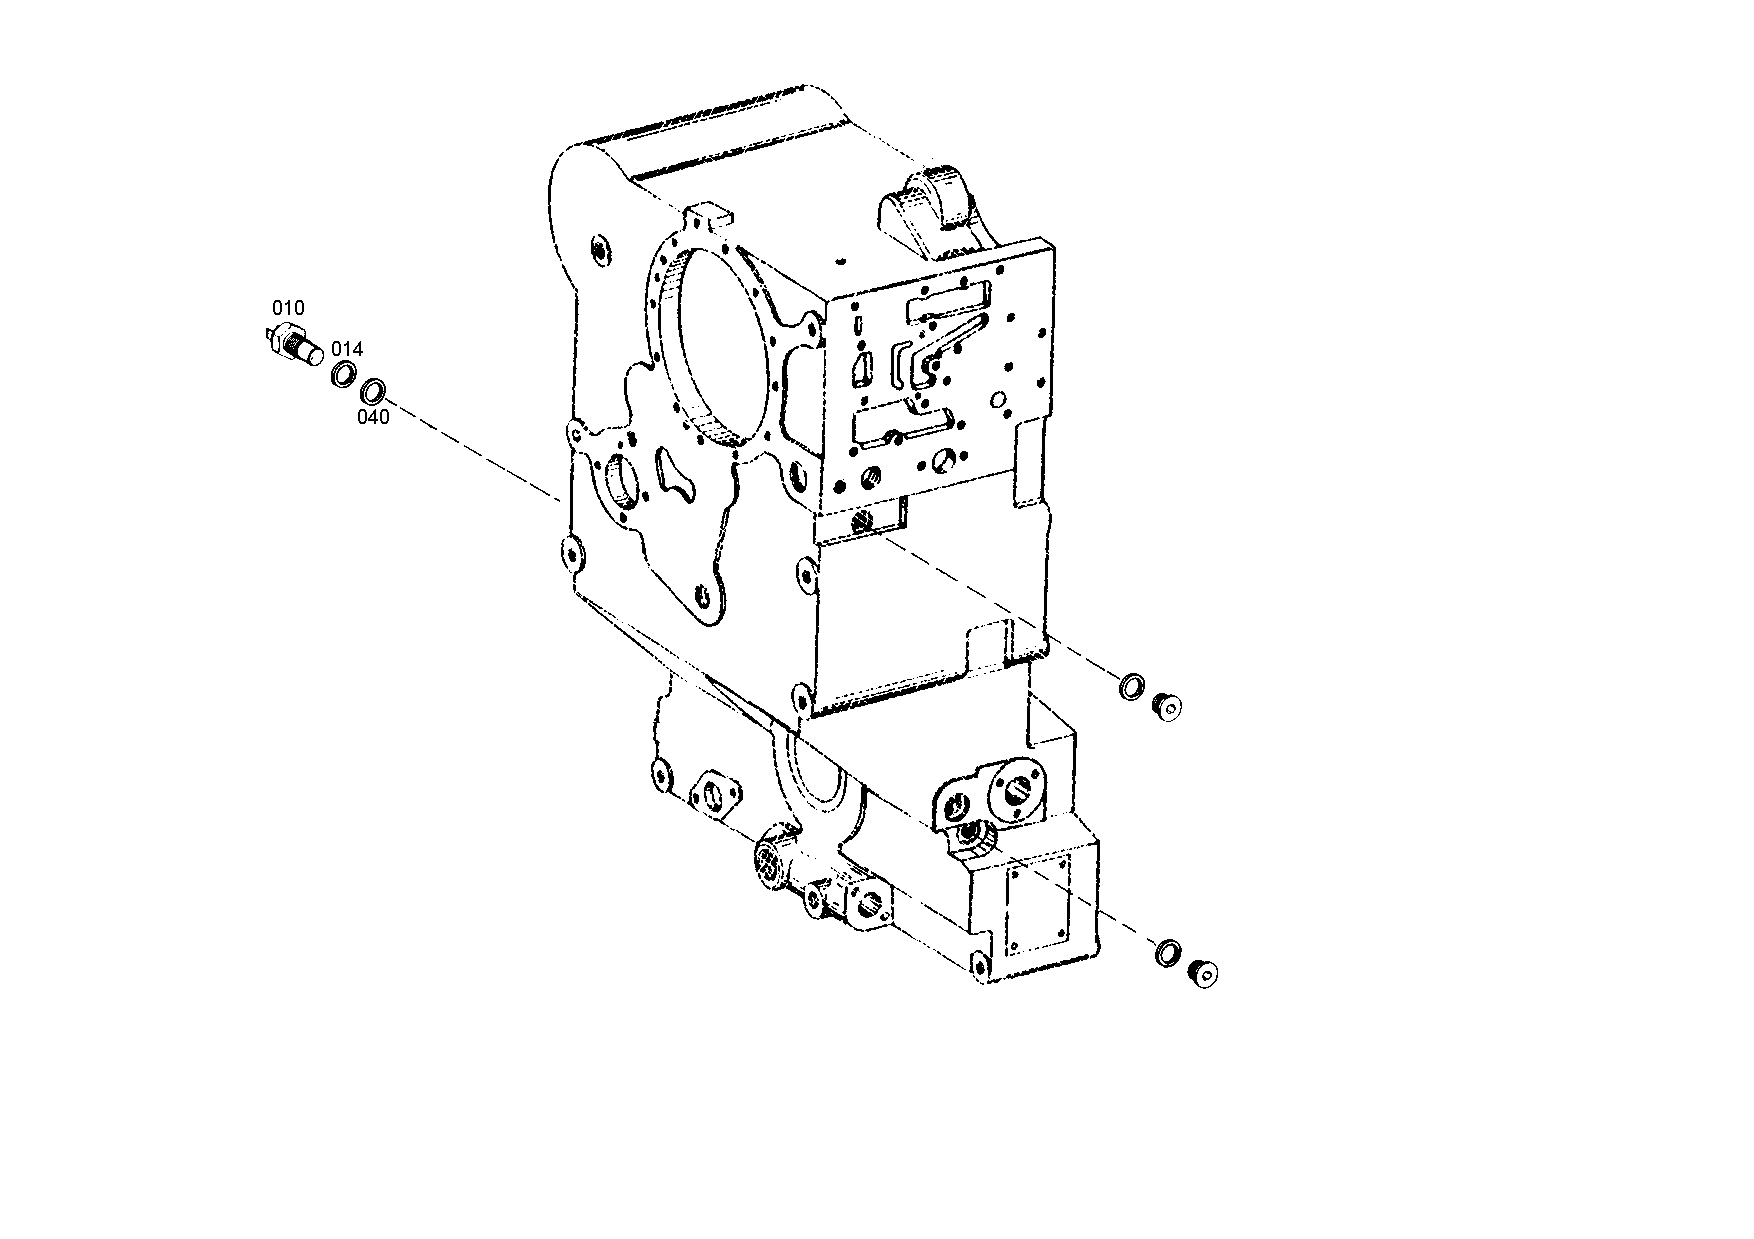 drawing for Manitowoc Crane Group Germany 01684054 - INDUCTIVE TRANSMITTER (figure 1)